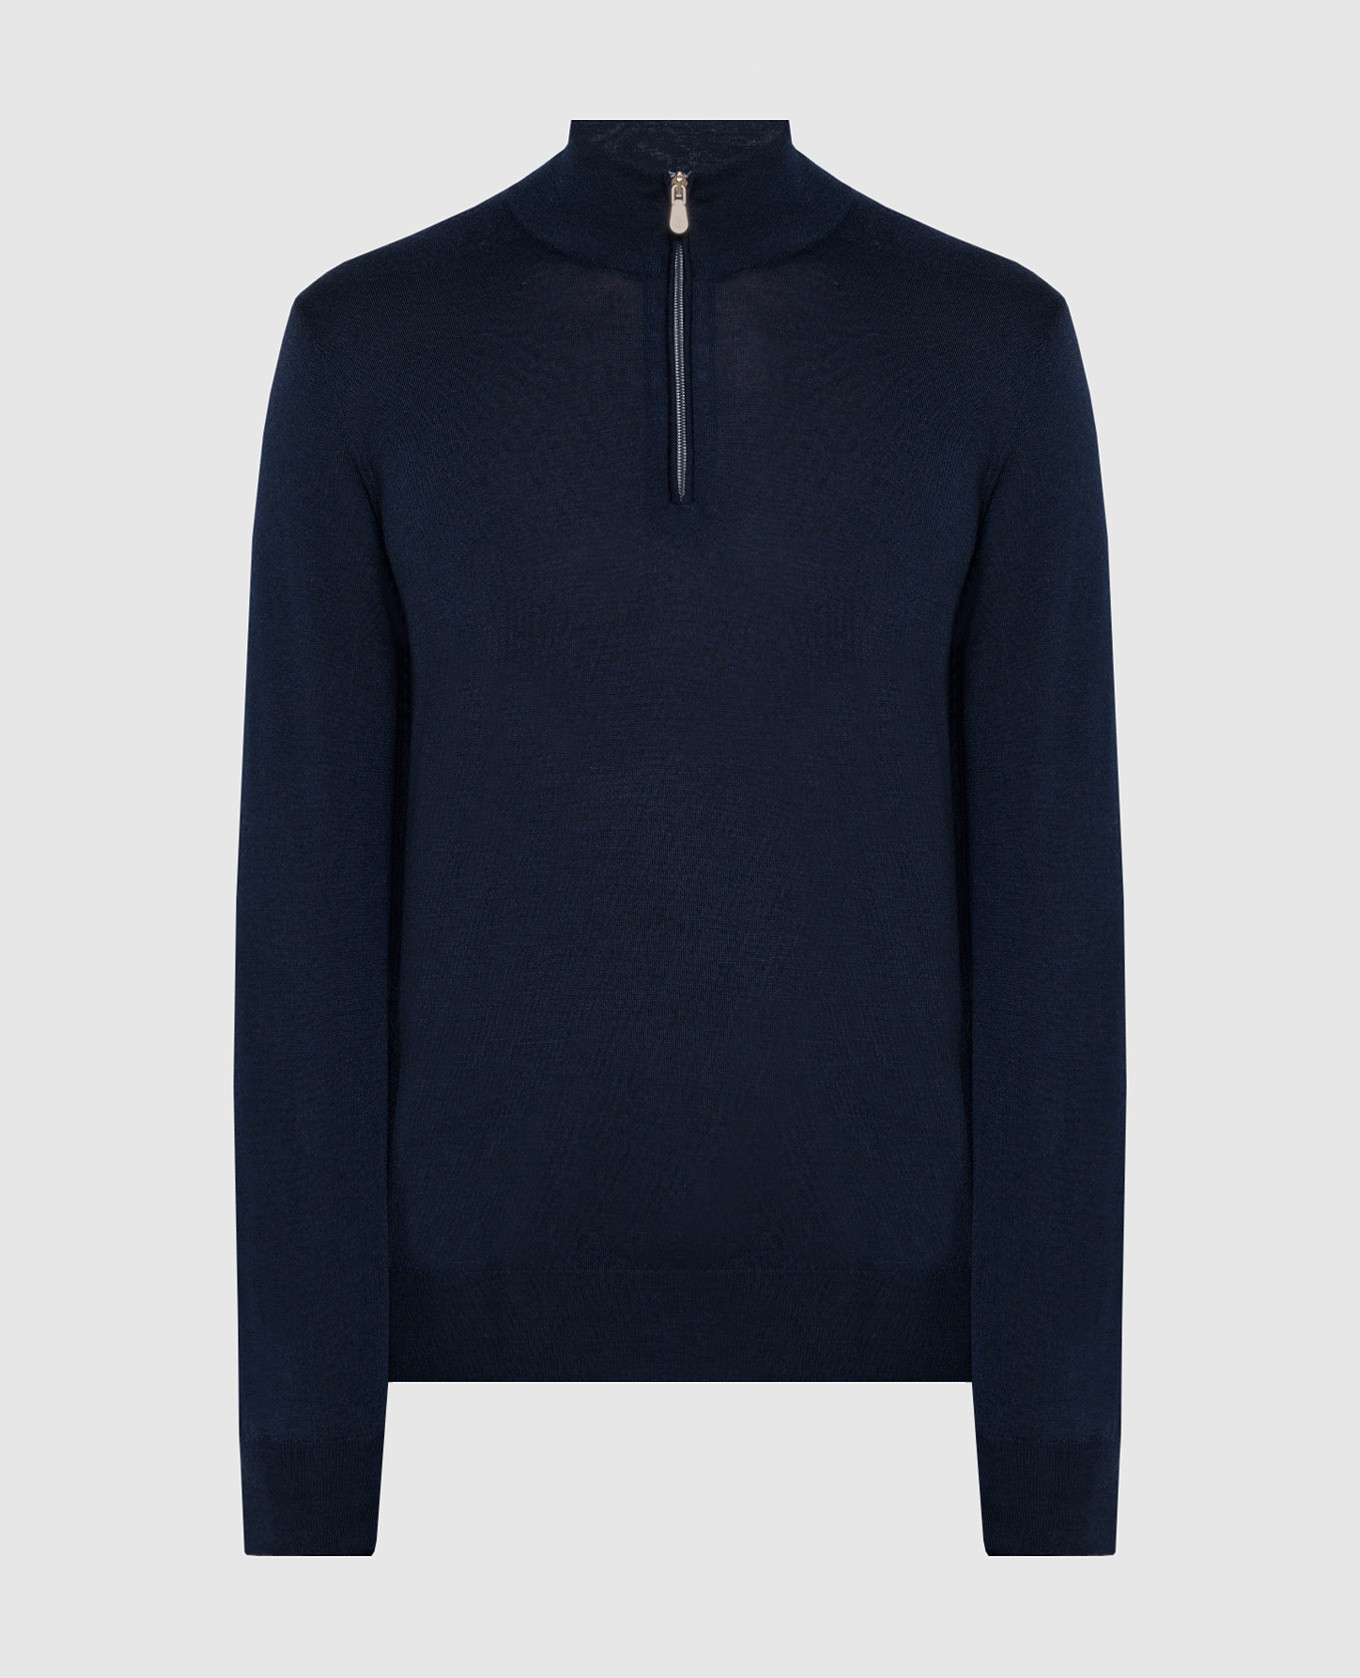 Blue wool and cashmere jumper